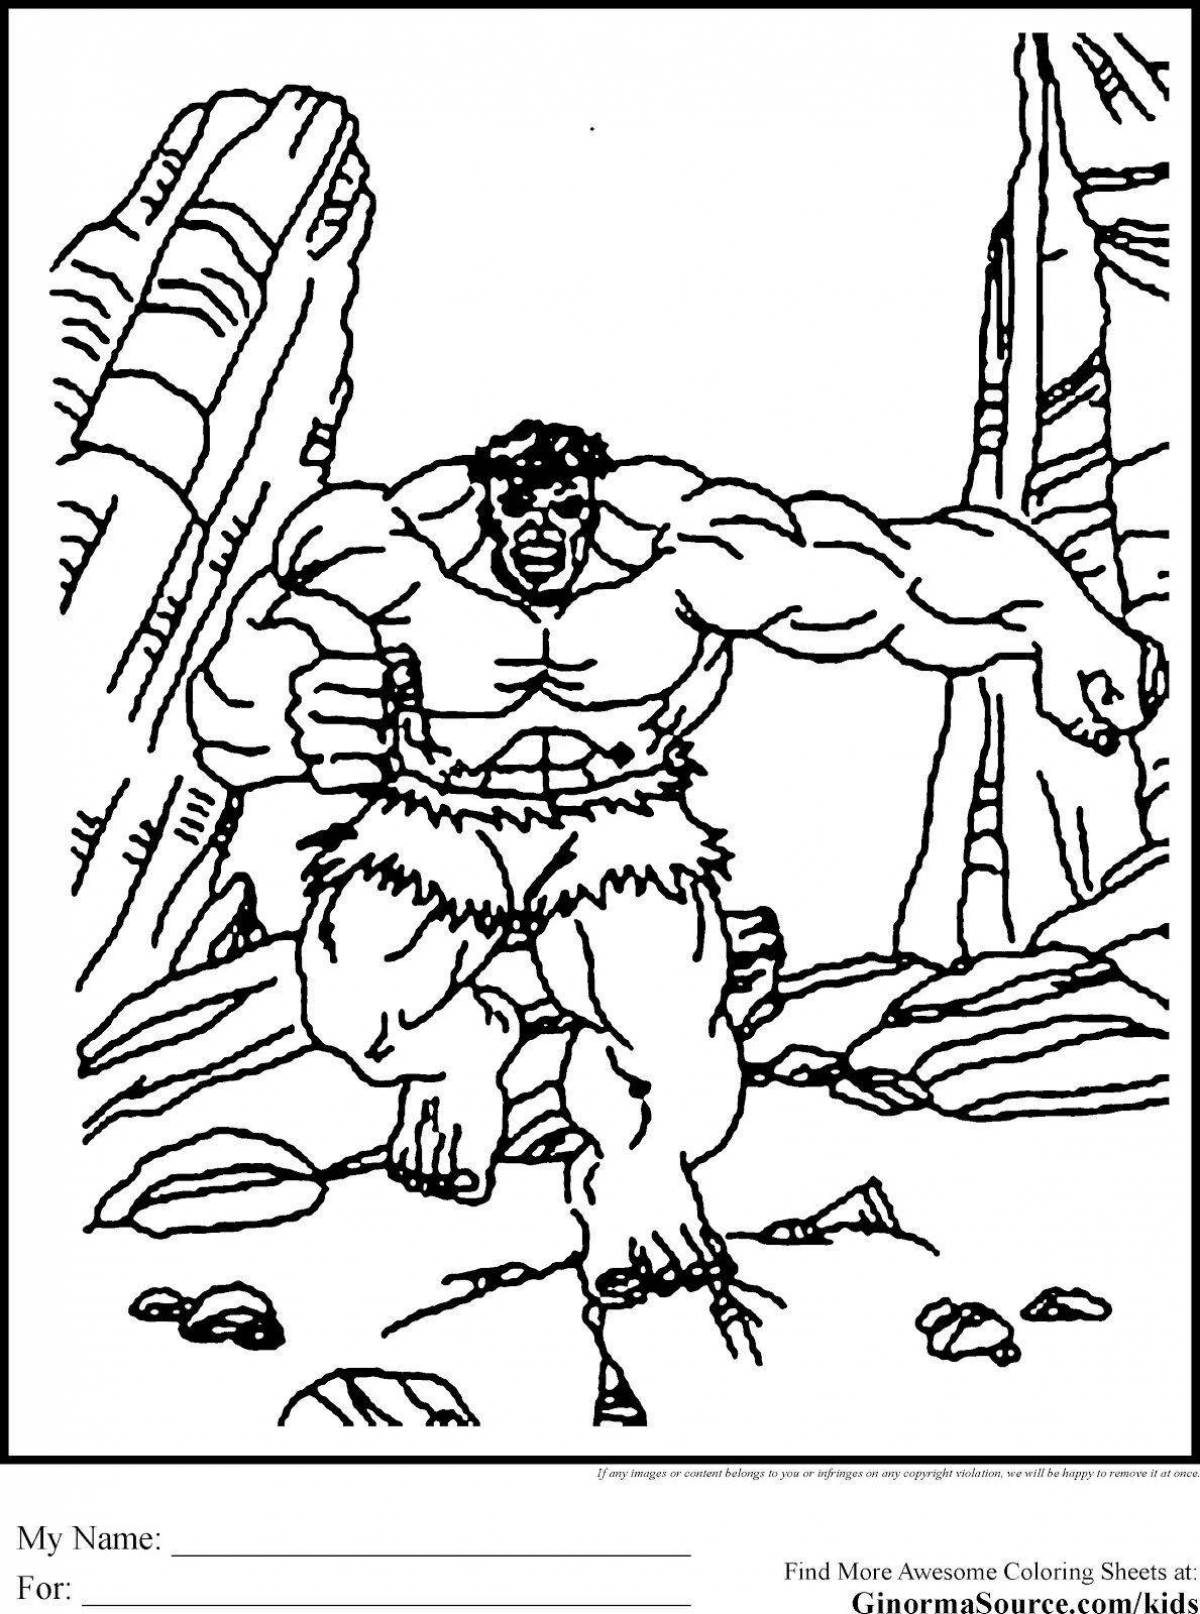 Amazing red hulk coloring book